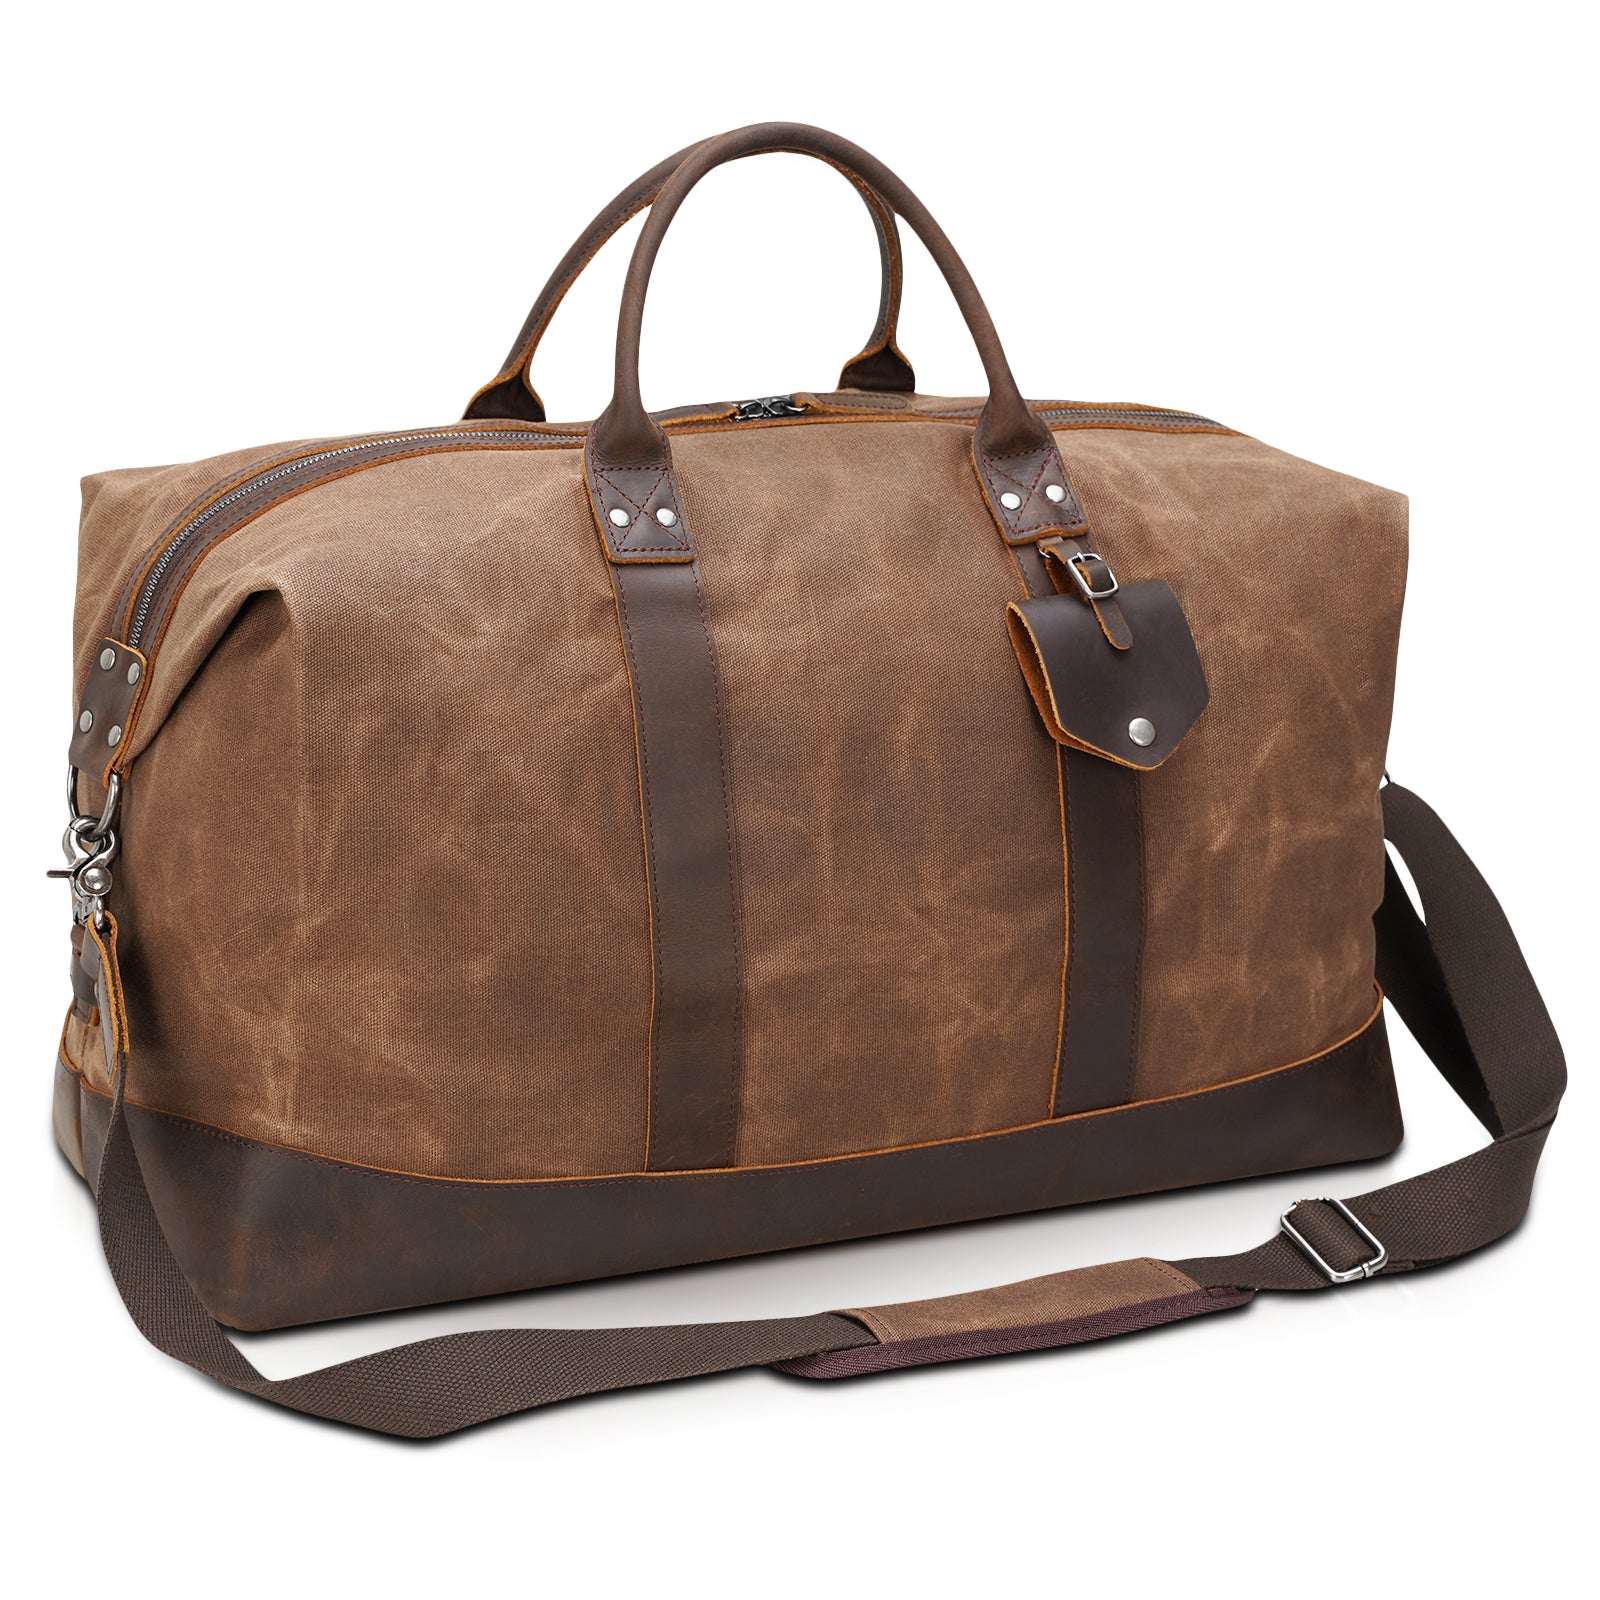 Polare 23” Cowhide Leather Waterproof Waxed Canvas Travel Duffel Bag 